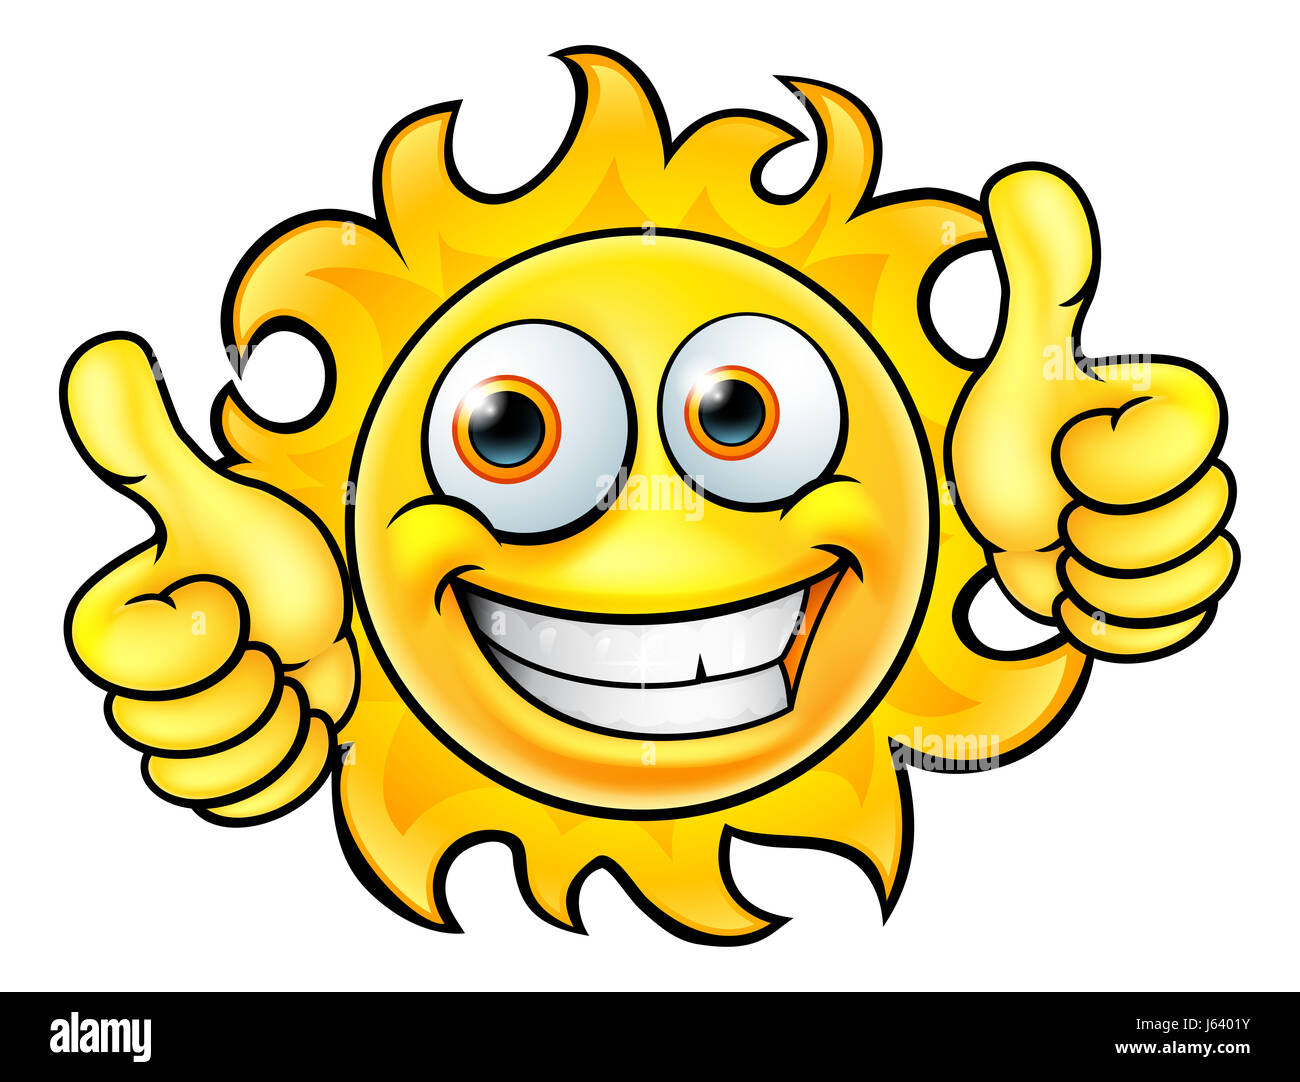 A sun cartoon character mascot smiling and giving a thumbs up Stock Photo